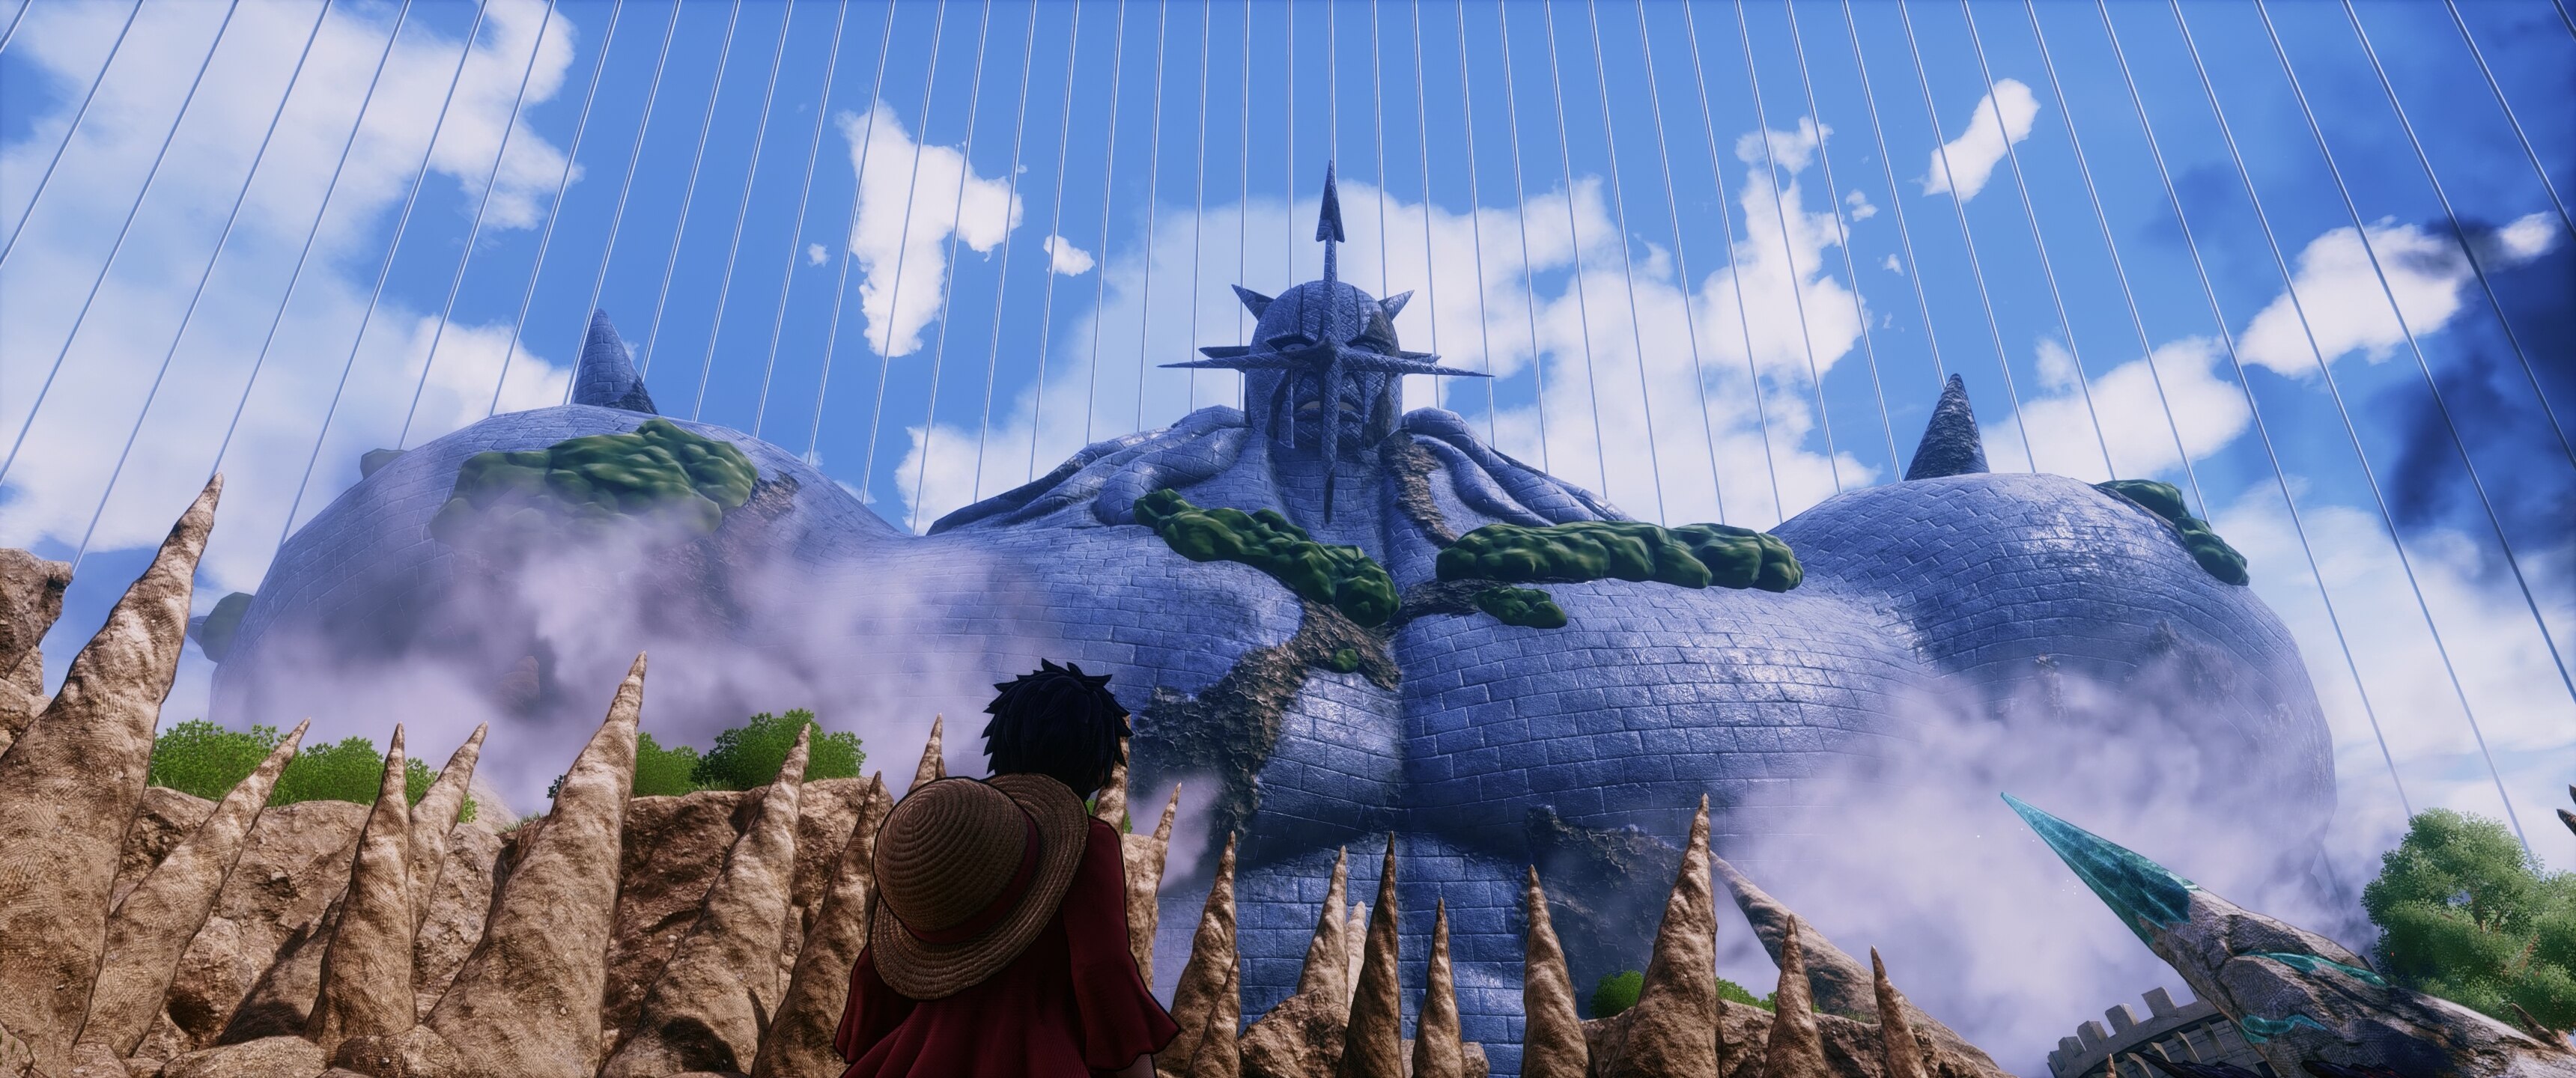 HD desktop wallpaper from One Piece Odyssey depicting a character looking at a mystical castle atop a massive turtle, set against a sky filled with clouds and strings.